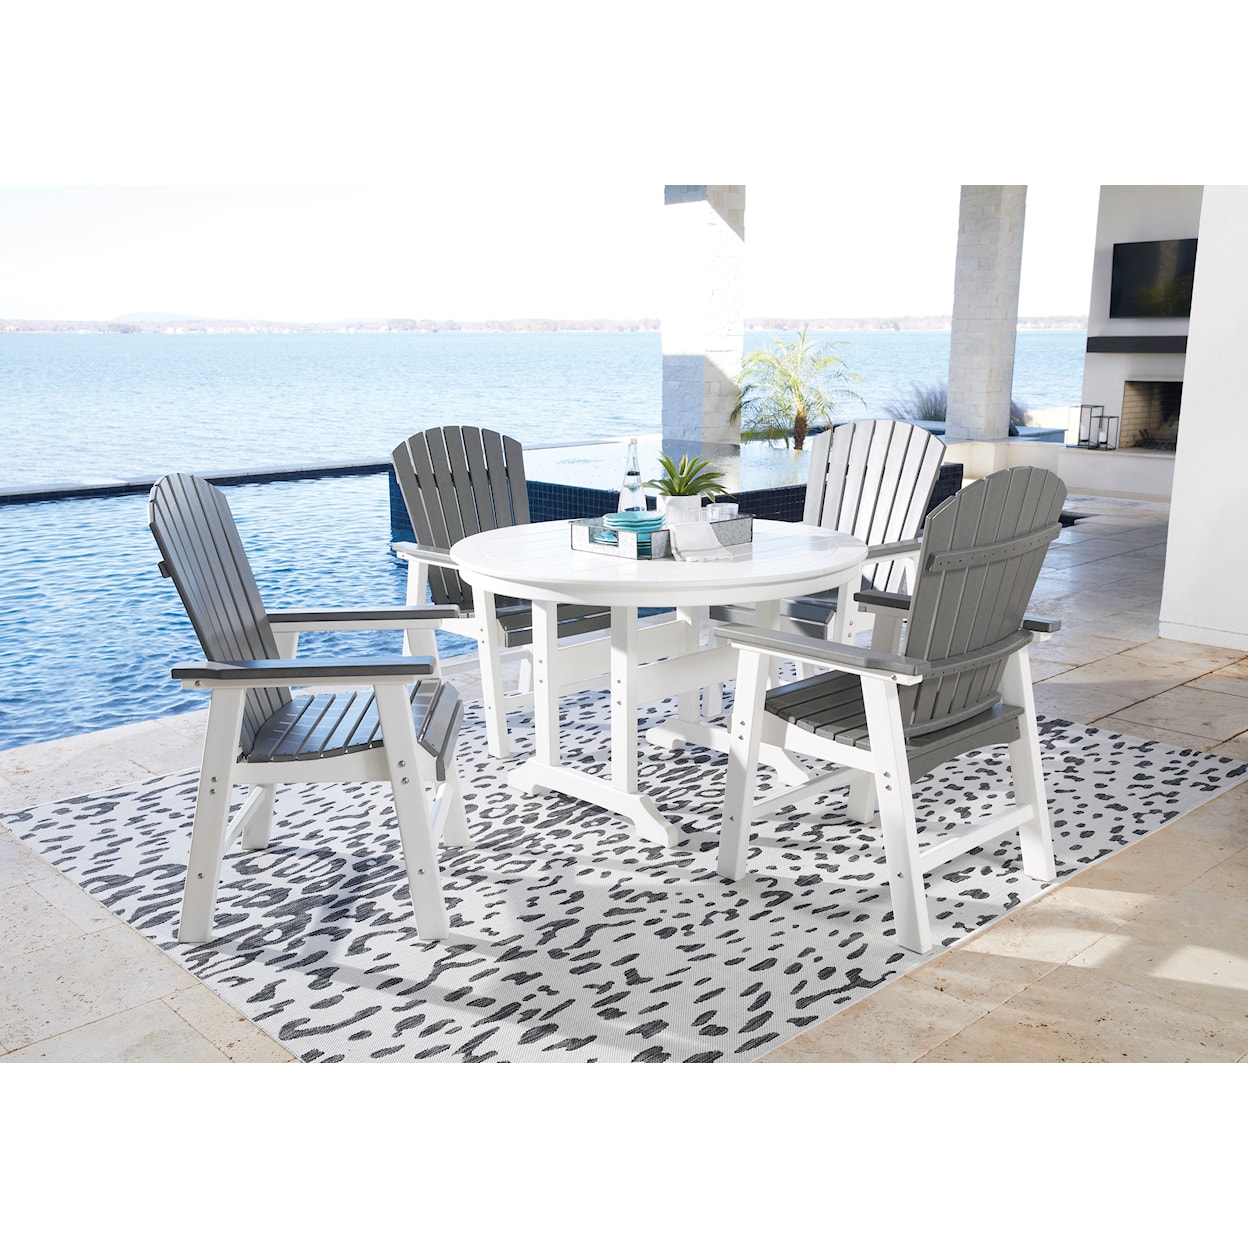 Benchcraft Crescent Luxe Outdoor Dining Table